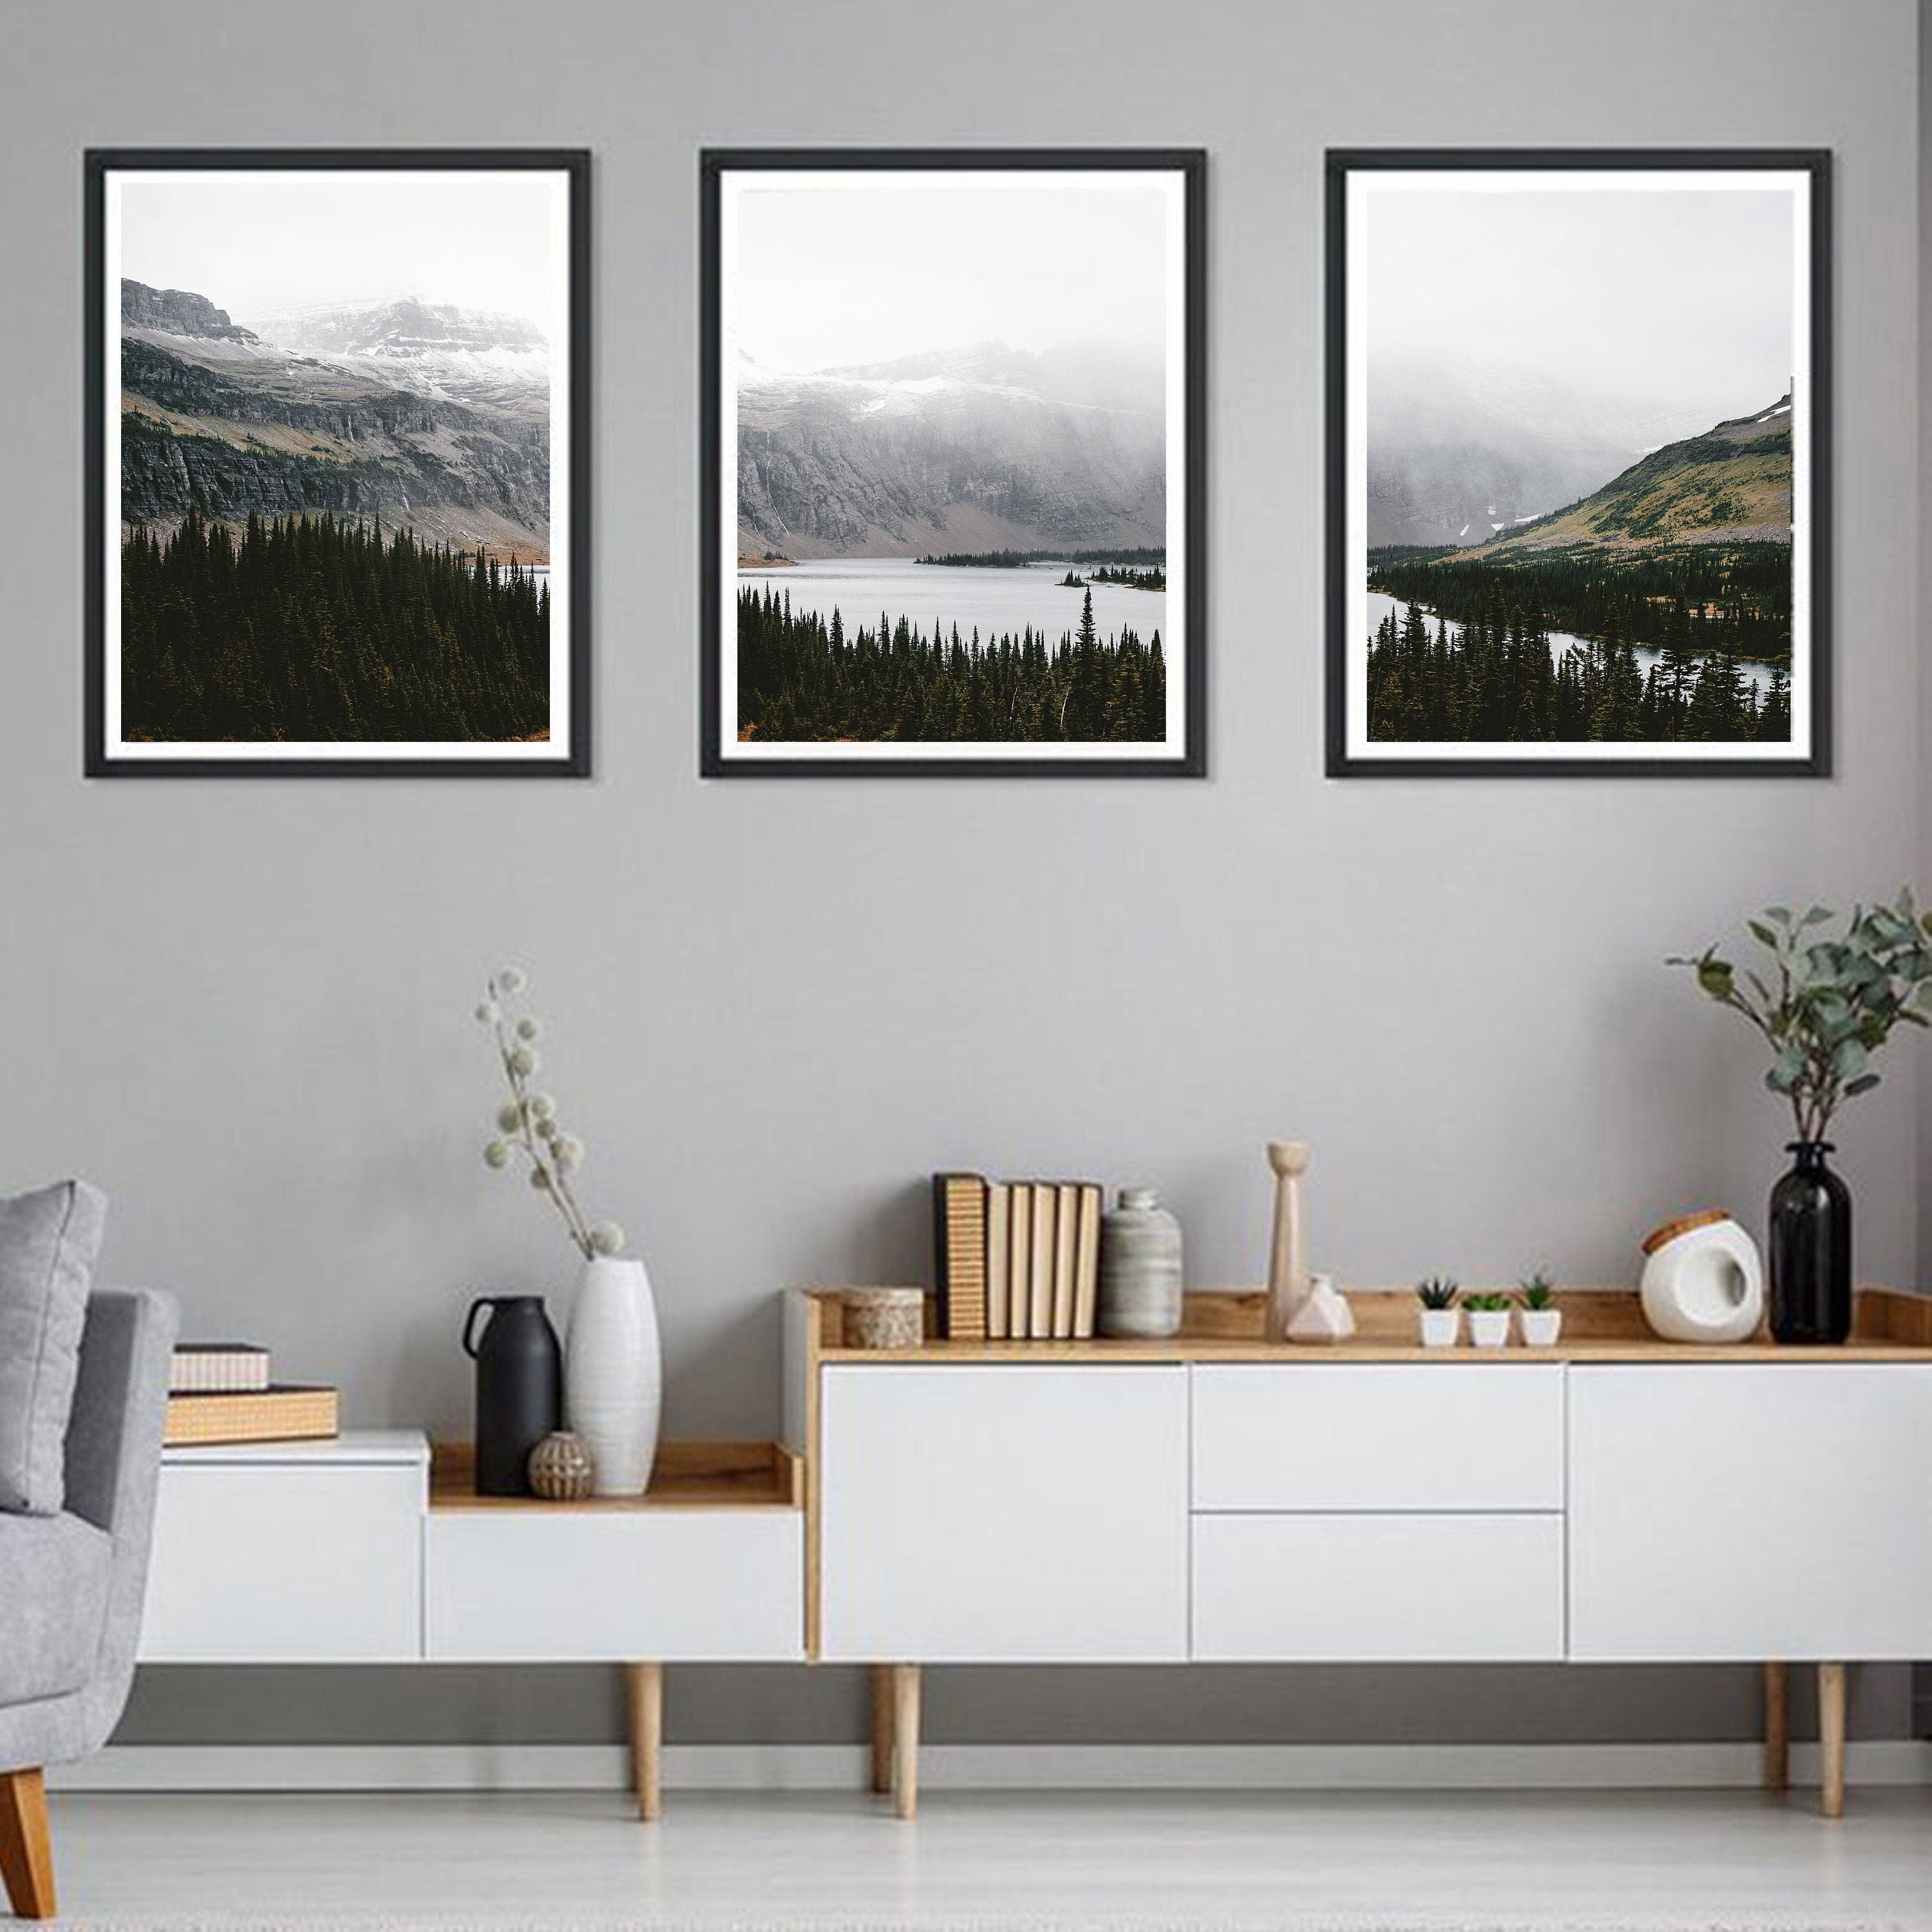 3 Piece Wall Art Mountains Print Glacier National Park Gallery | Etsy